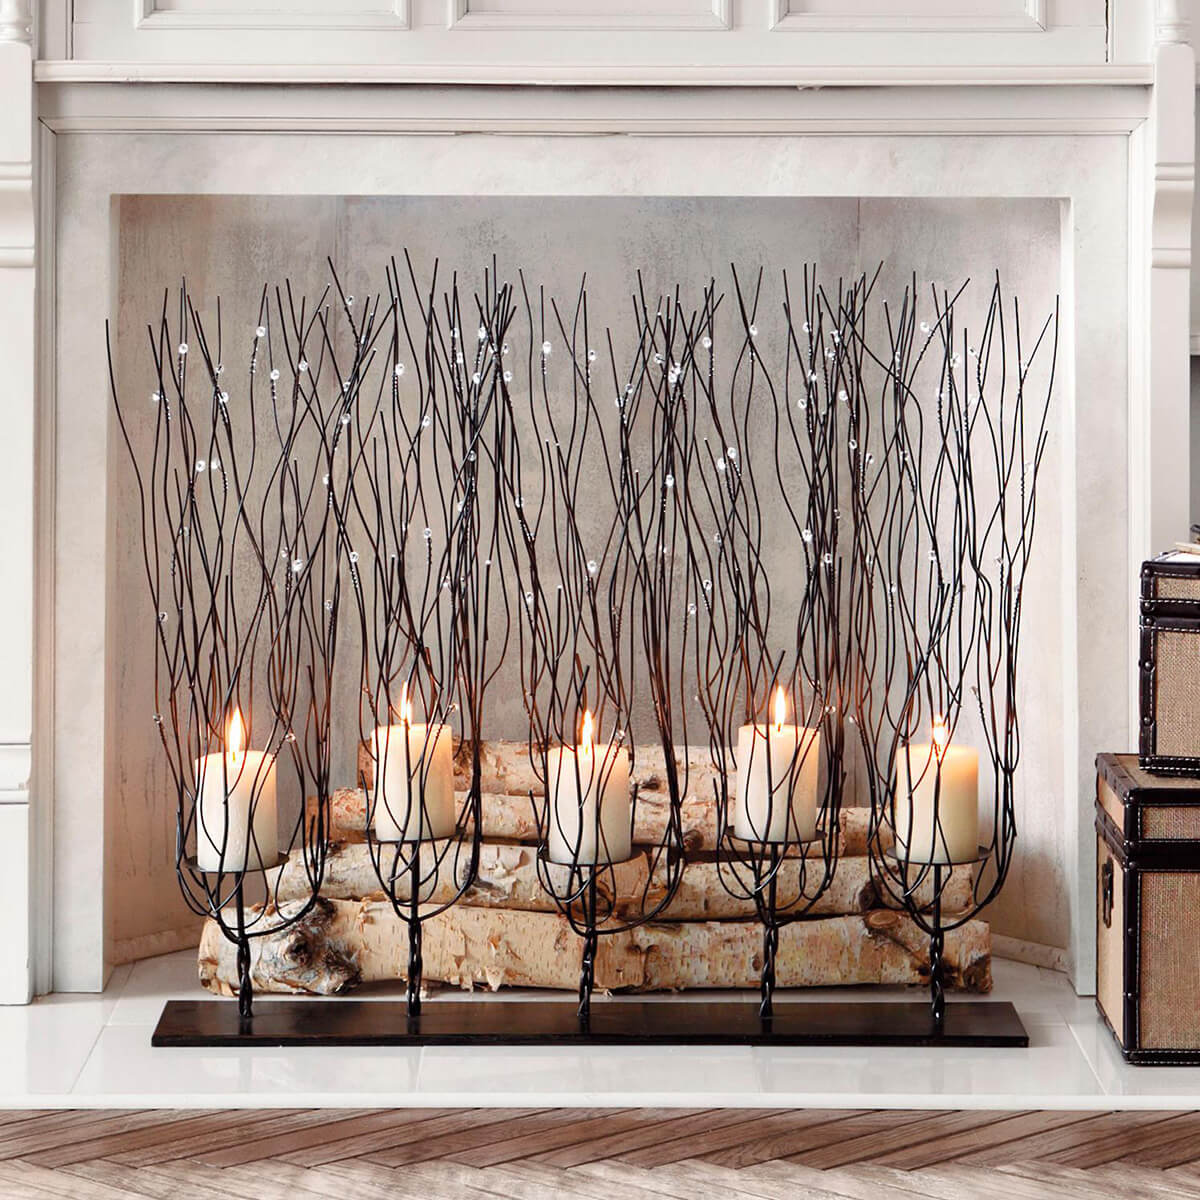 Candles, Twigs and Crystals in a Fireplace